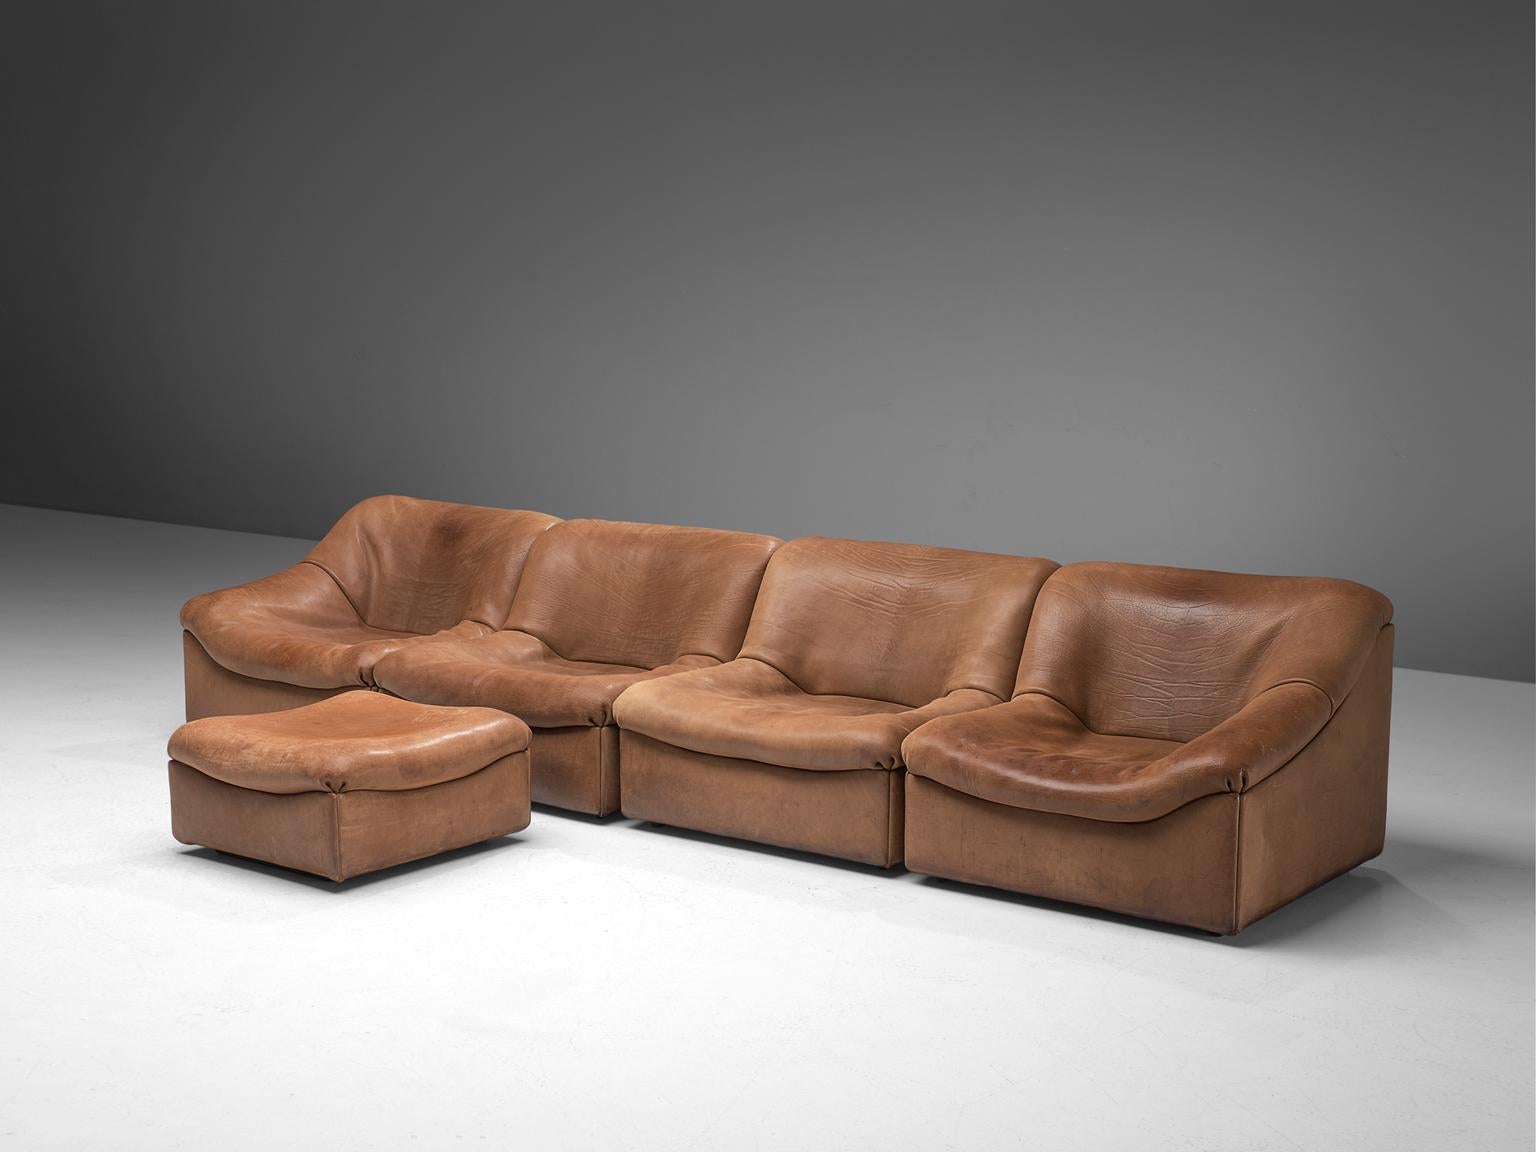 De Sede, DS46 sectional sofa with ottoman, cognac buffalo leather, Switzerland, 1970s.

Comfortable four-modular sectional sofa with ottoman in thick buffalo leather by De Sede. This model features a solid base with a rounded, bulky seat and a